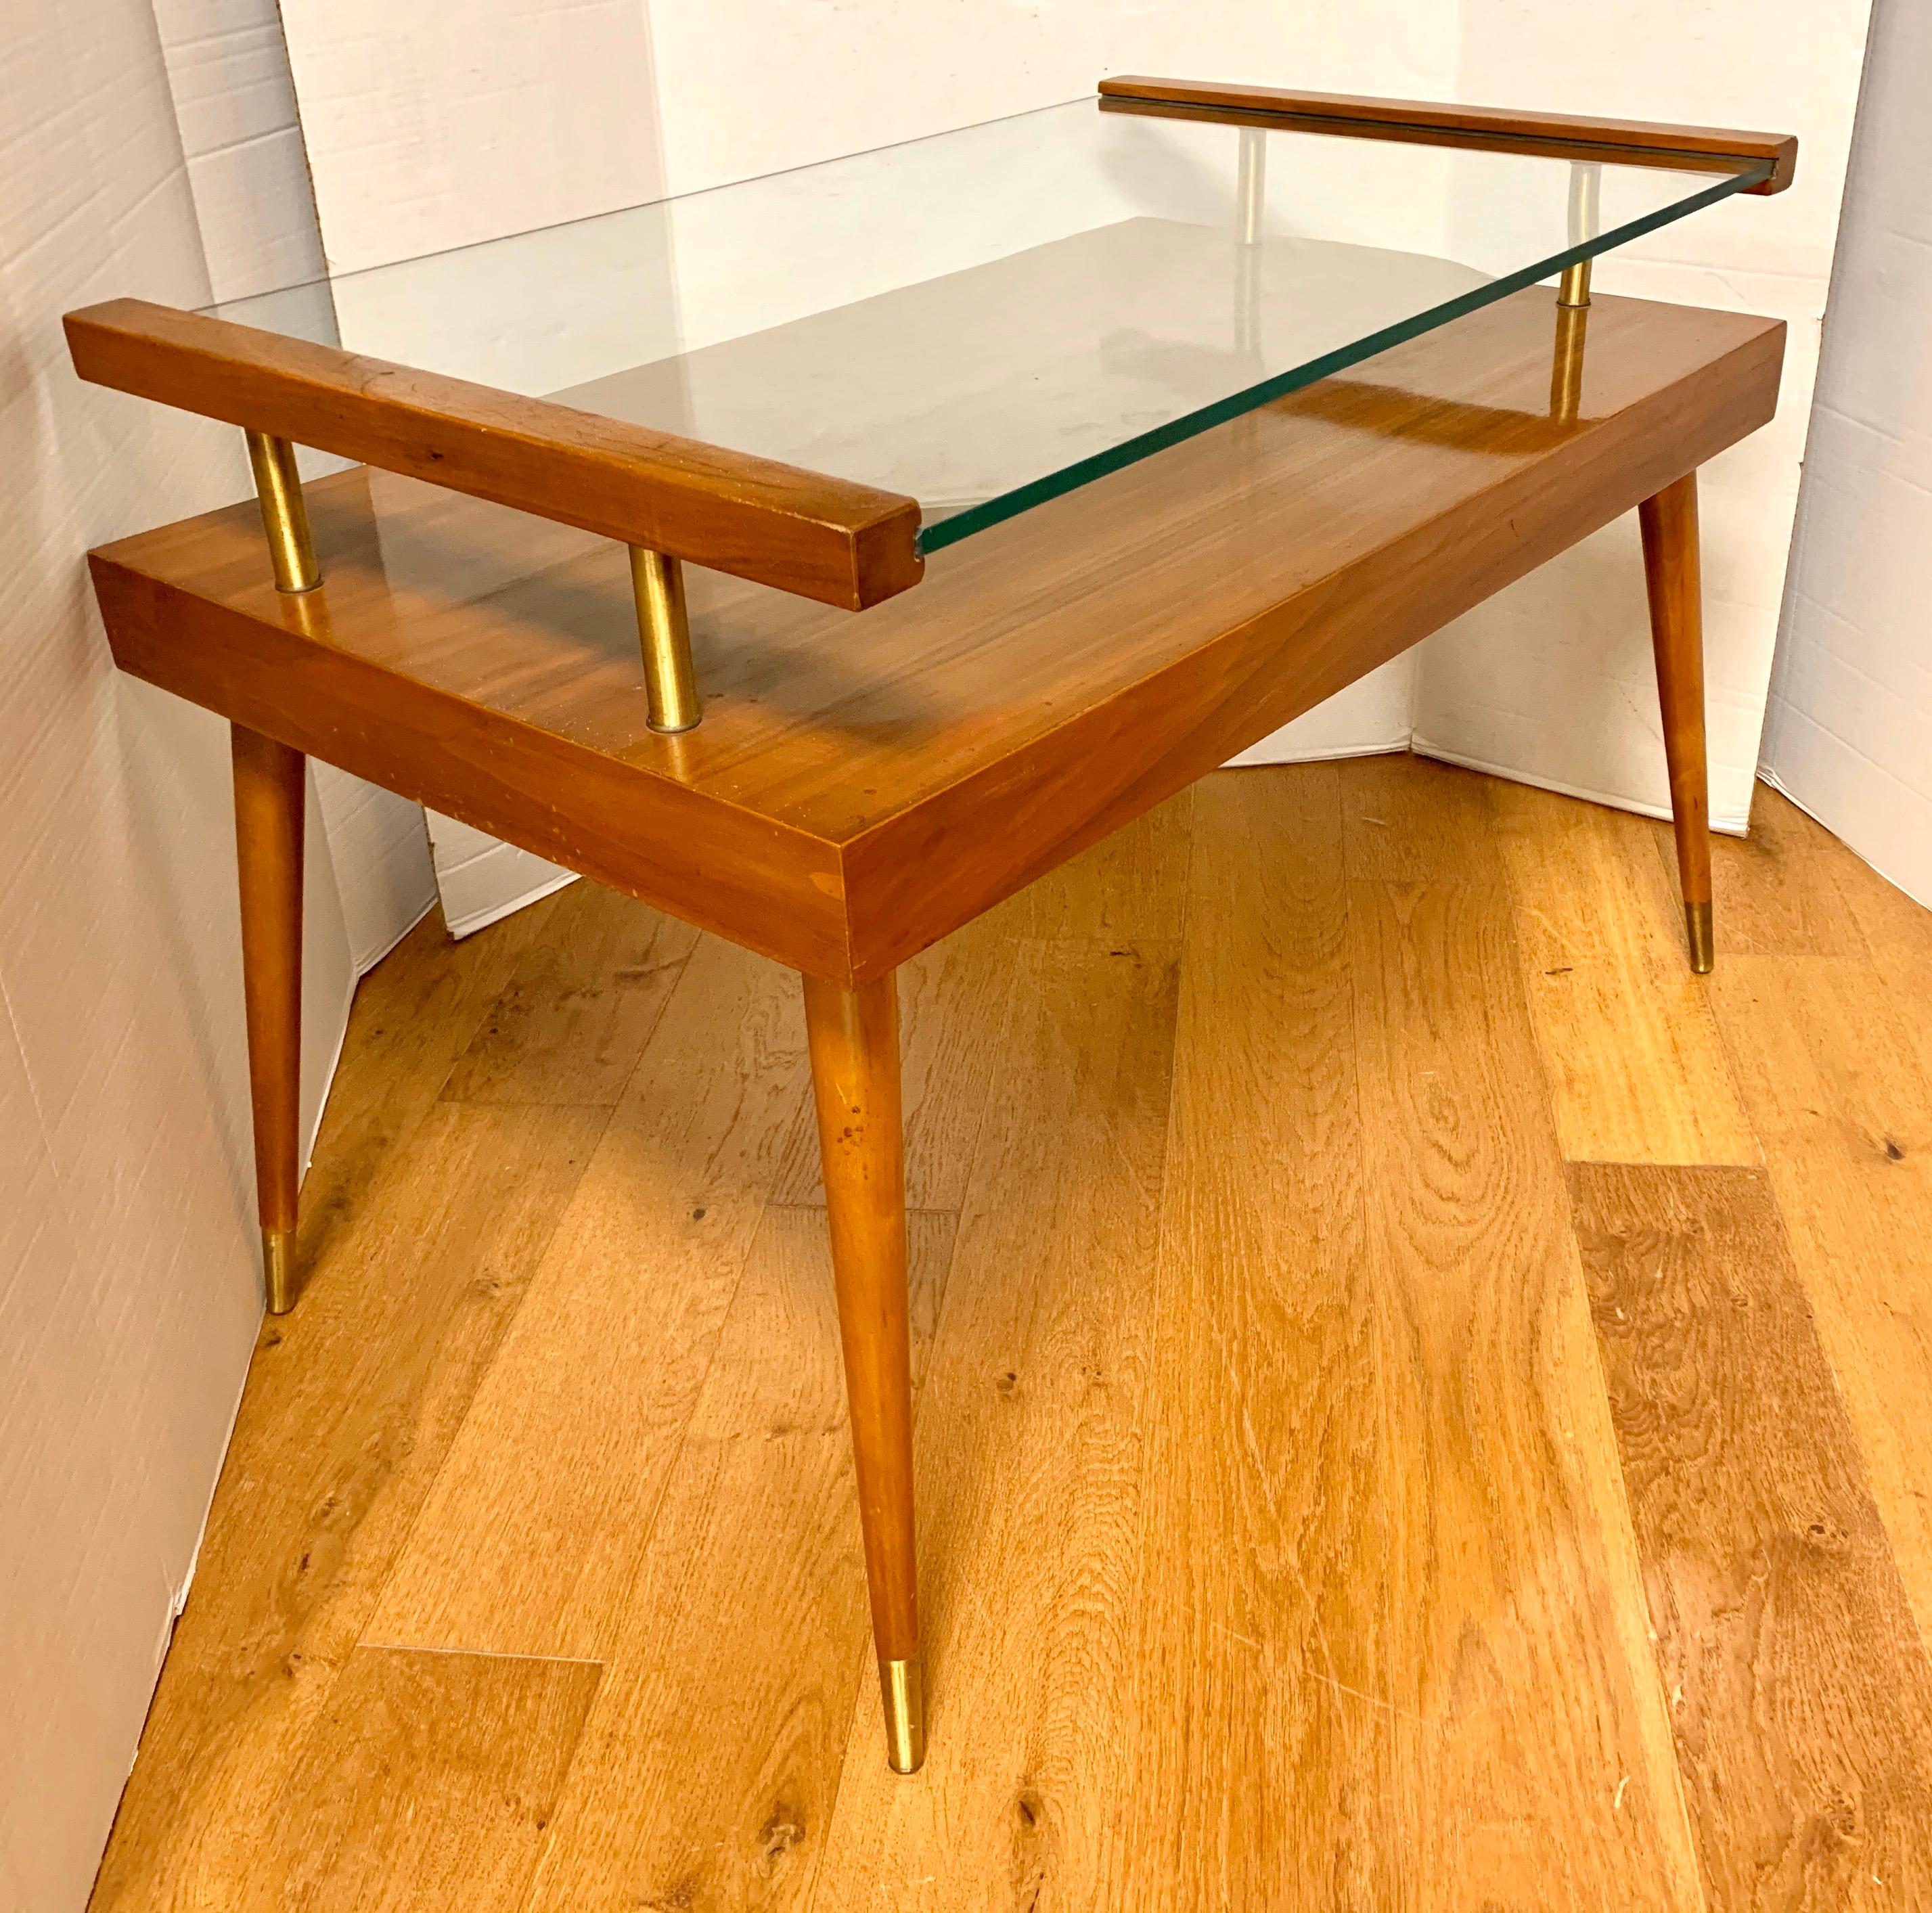 American Mid-Century Modern Danish Two-Tiered Table Teak and Sliding Glass